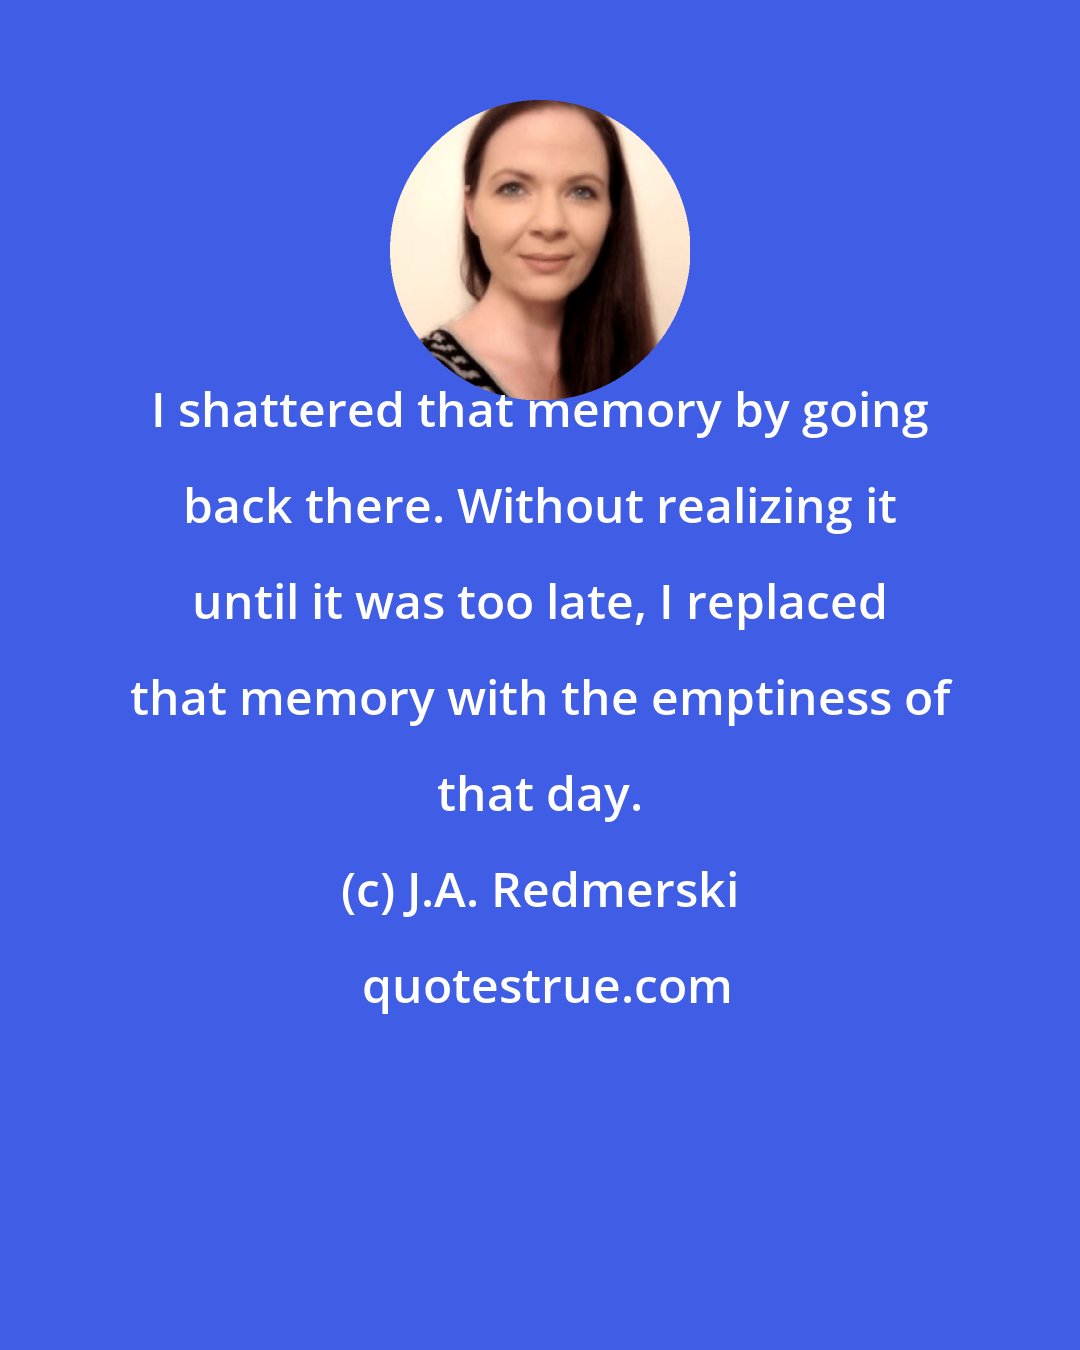 J.A. Redmerski: I shattered that memory by going back there. Without realizing it until it was too late, I replaced that memory with the emptiness of that day.